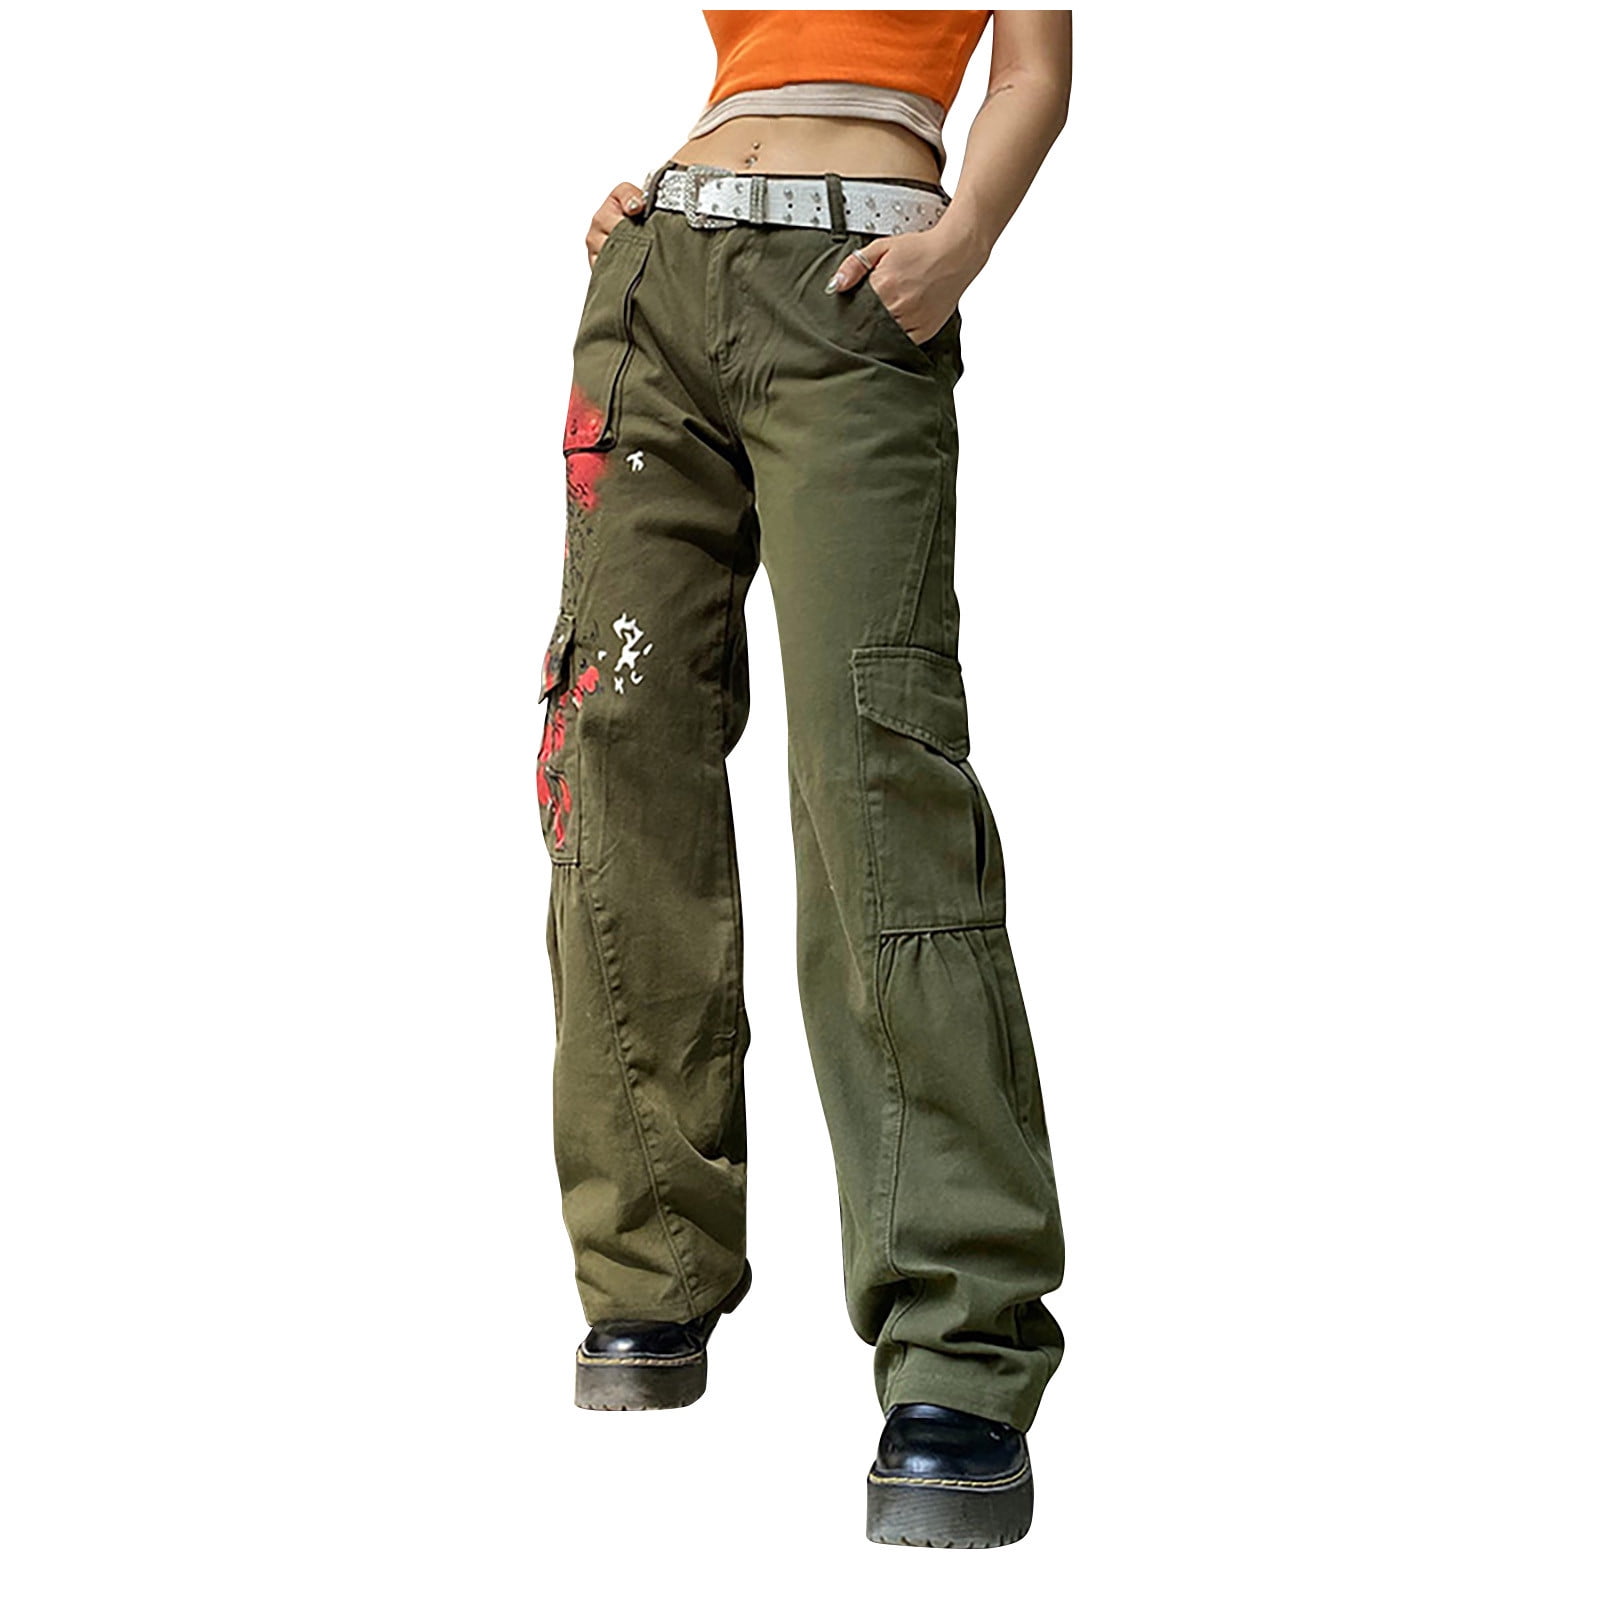 HAPIMO Sales Punk Hipster Pants for Women Casual Comfy Pants